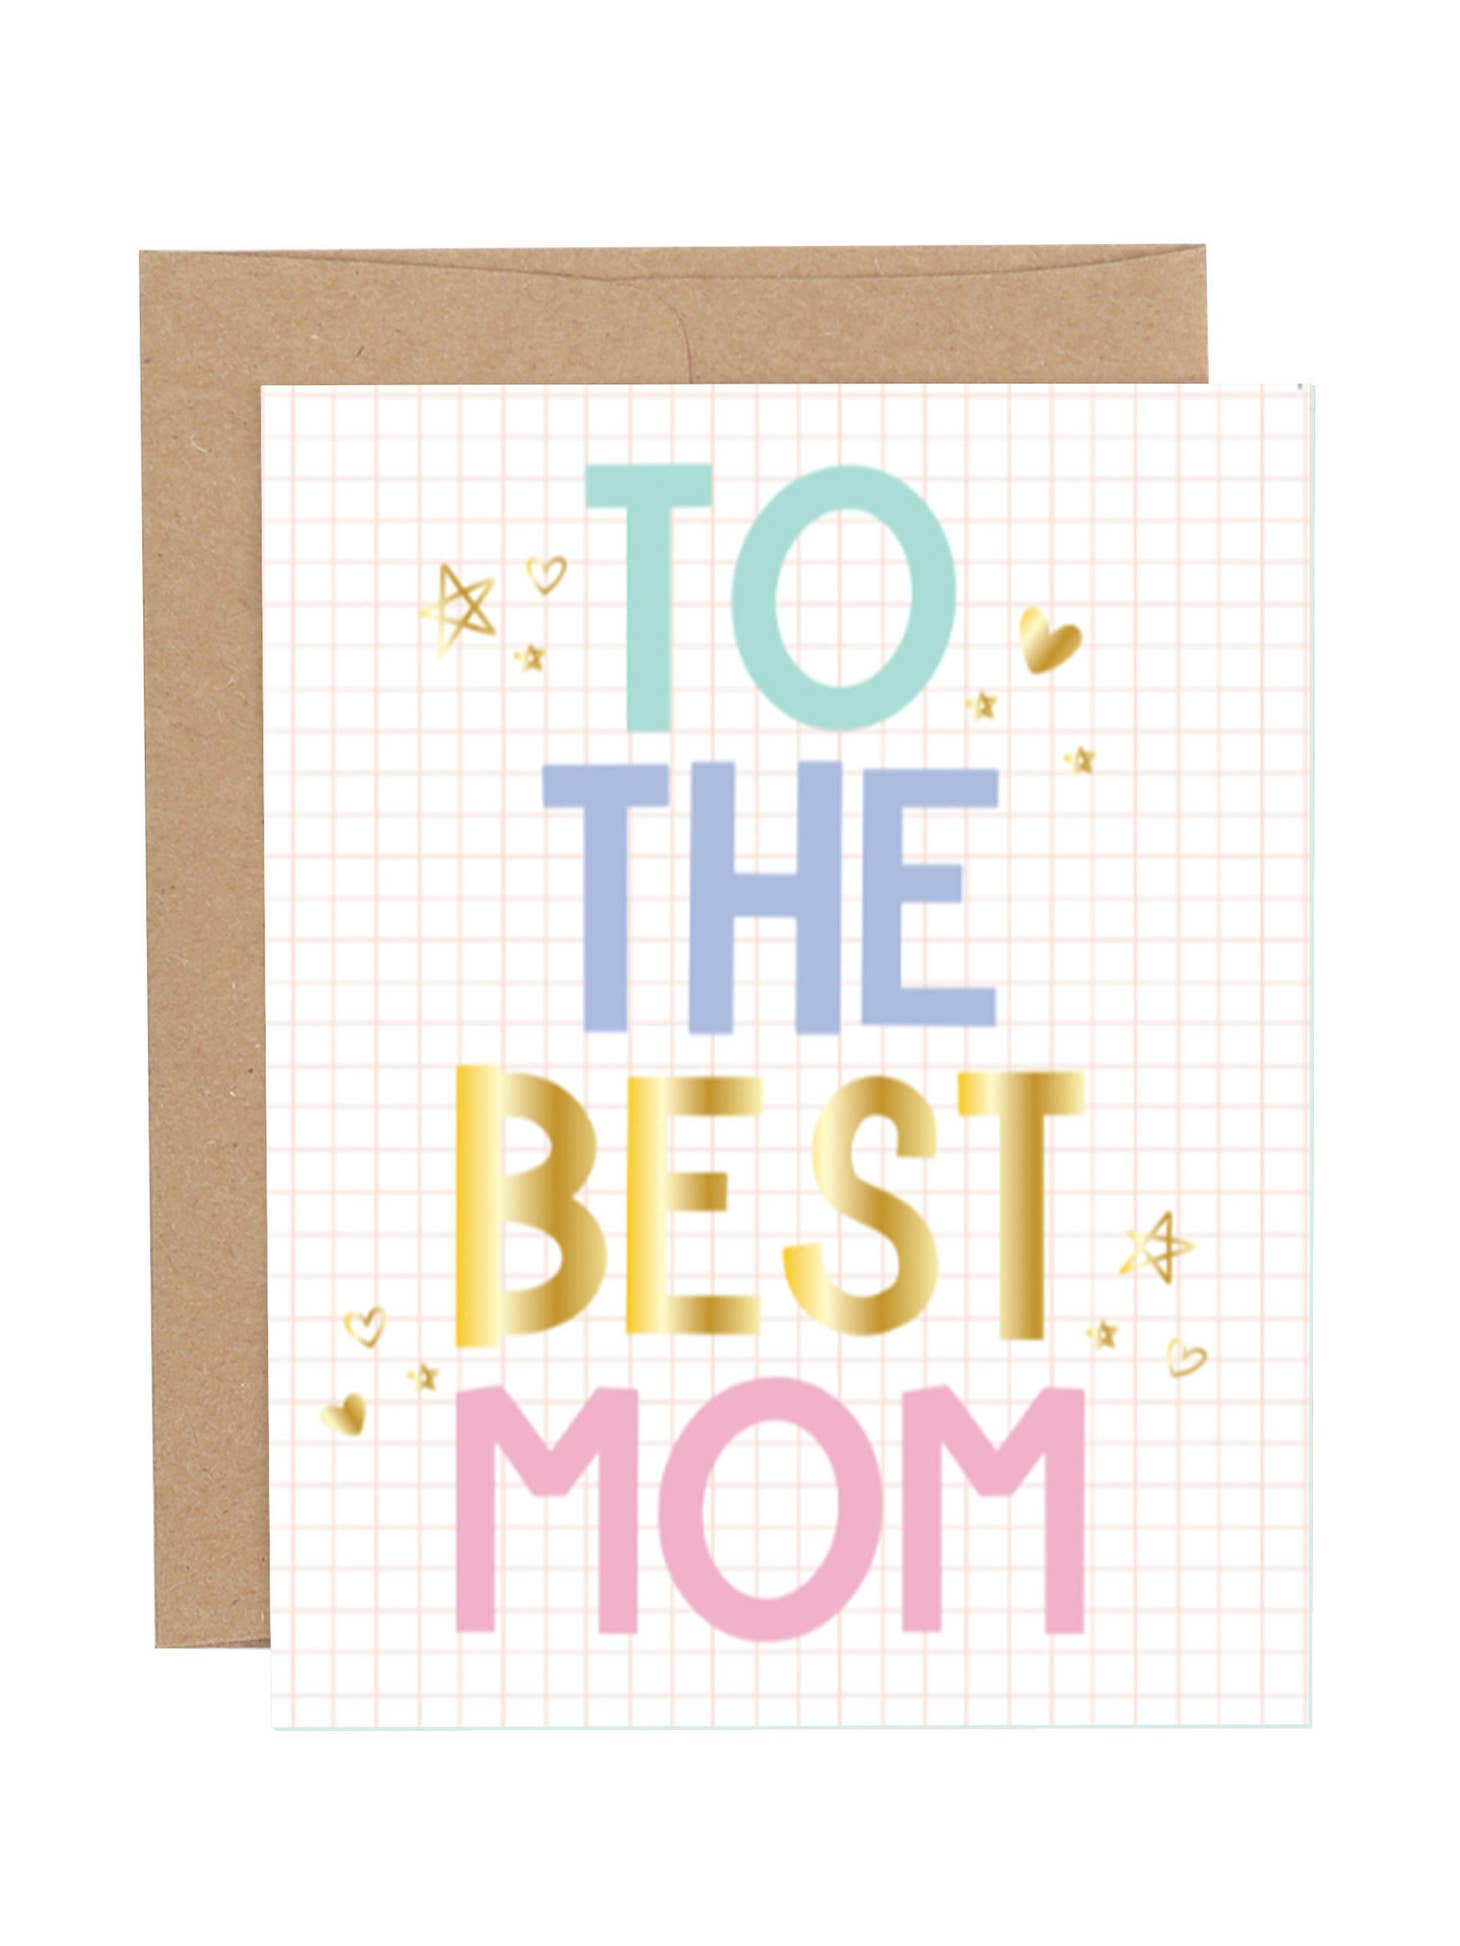 Best Mom Greeting Card - Favorite Little Things Co